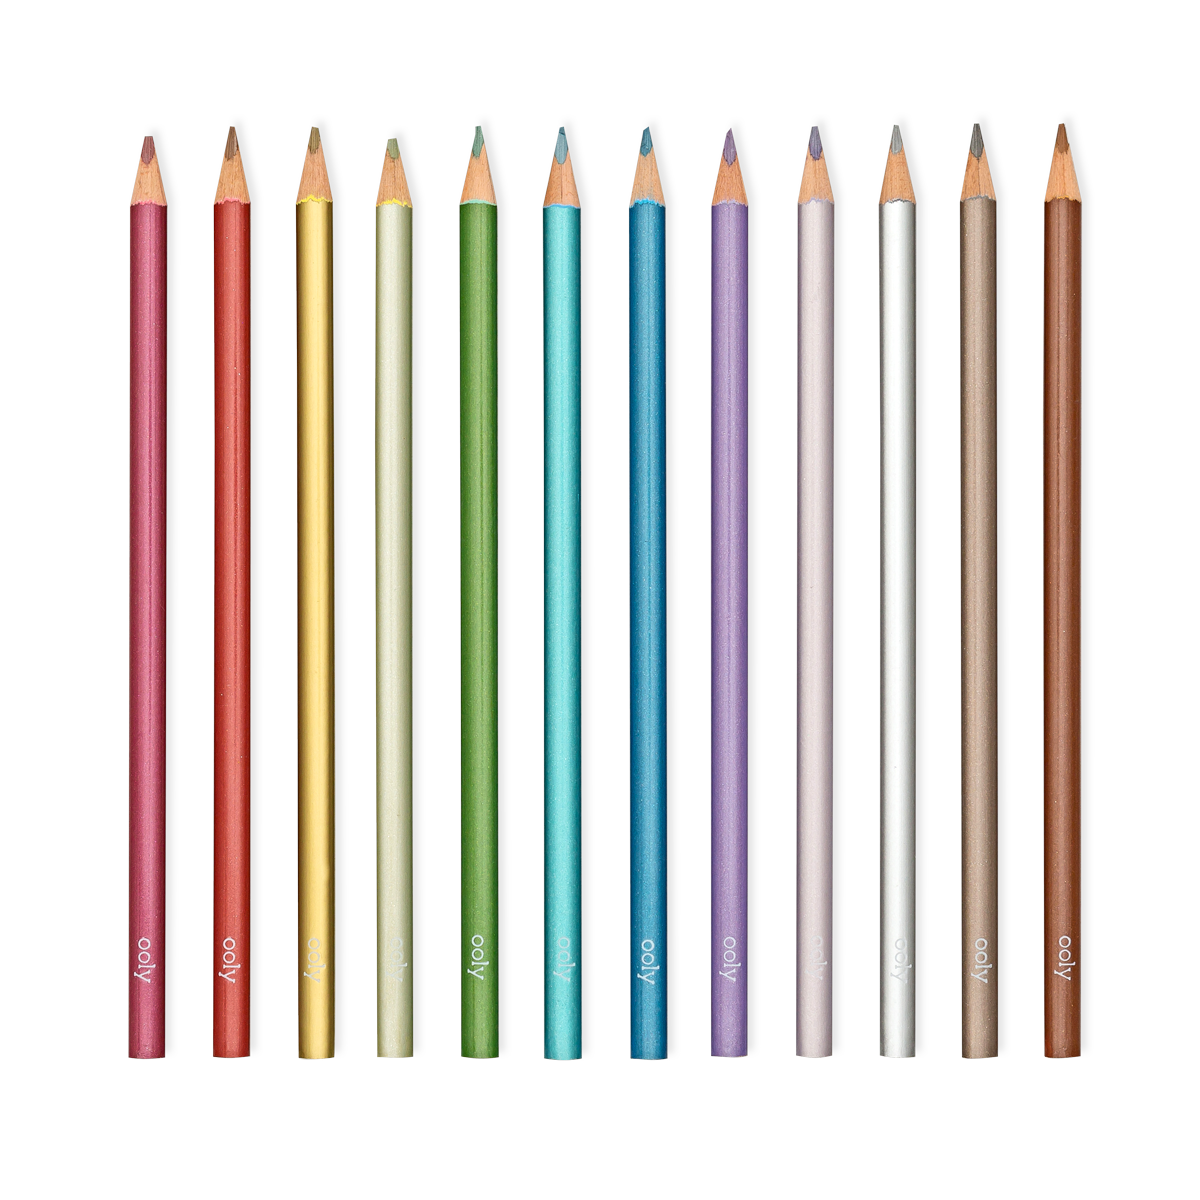  24 Pieces Coastal Colors Pencils for Kids Cute Pencils  Erasable Colored Pencils Wood Colored Pencils with Eraser Blue Wooden  Pencils for School Office : Office Products